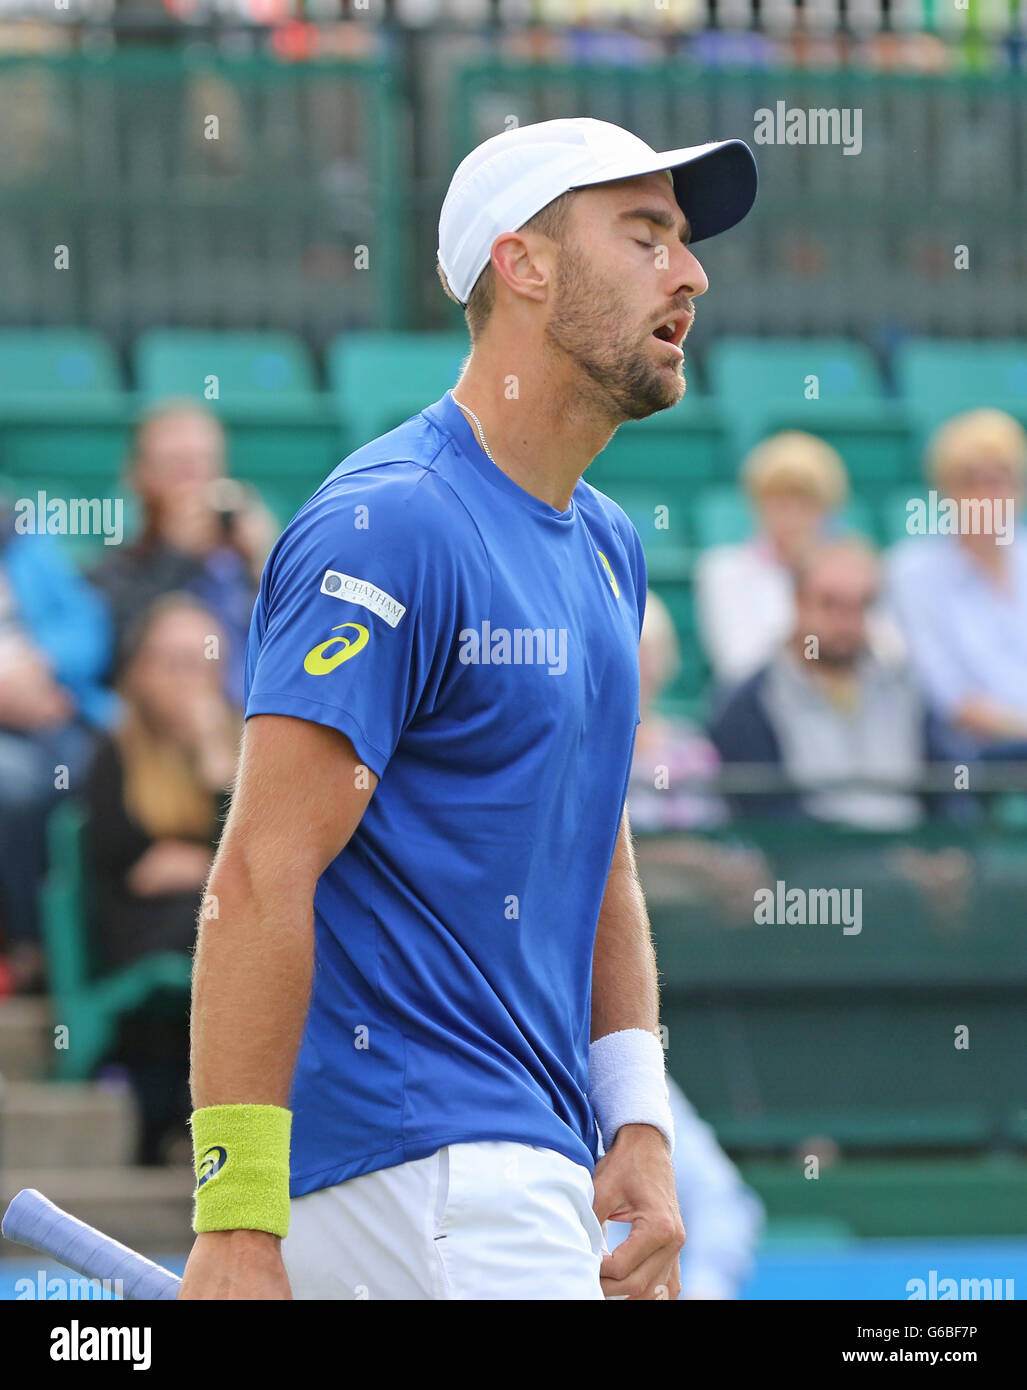 24.06.2016. Nottingham Tennis Centre, Nottingham, England. Aegon Open Mens ATP Tennis. Anguish from Steve Johnson of USA as he loses a point Stock Photo